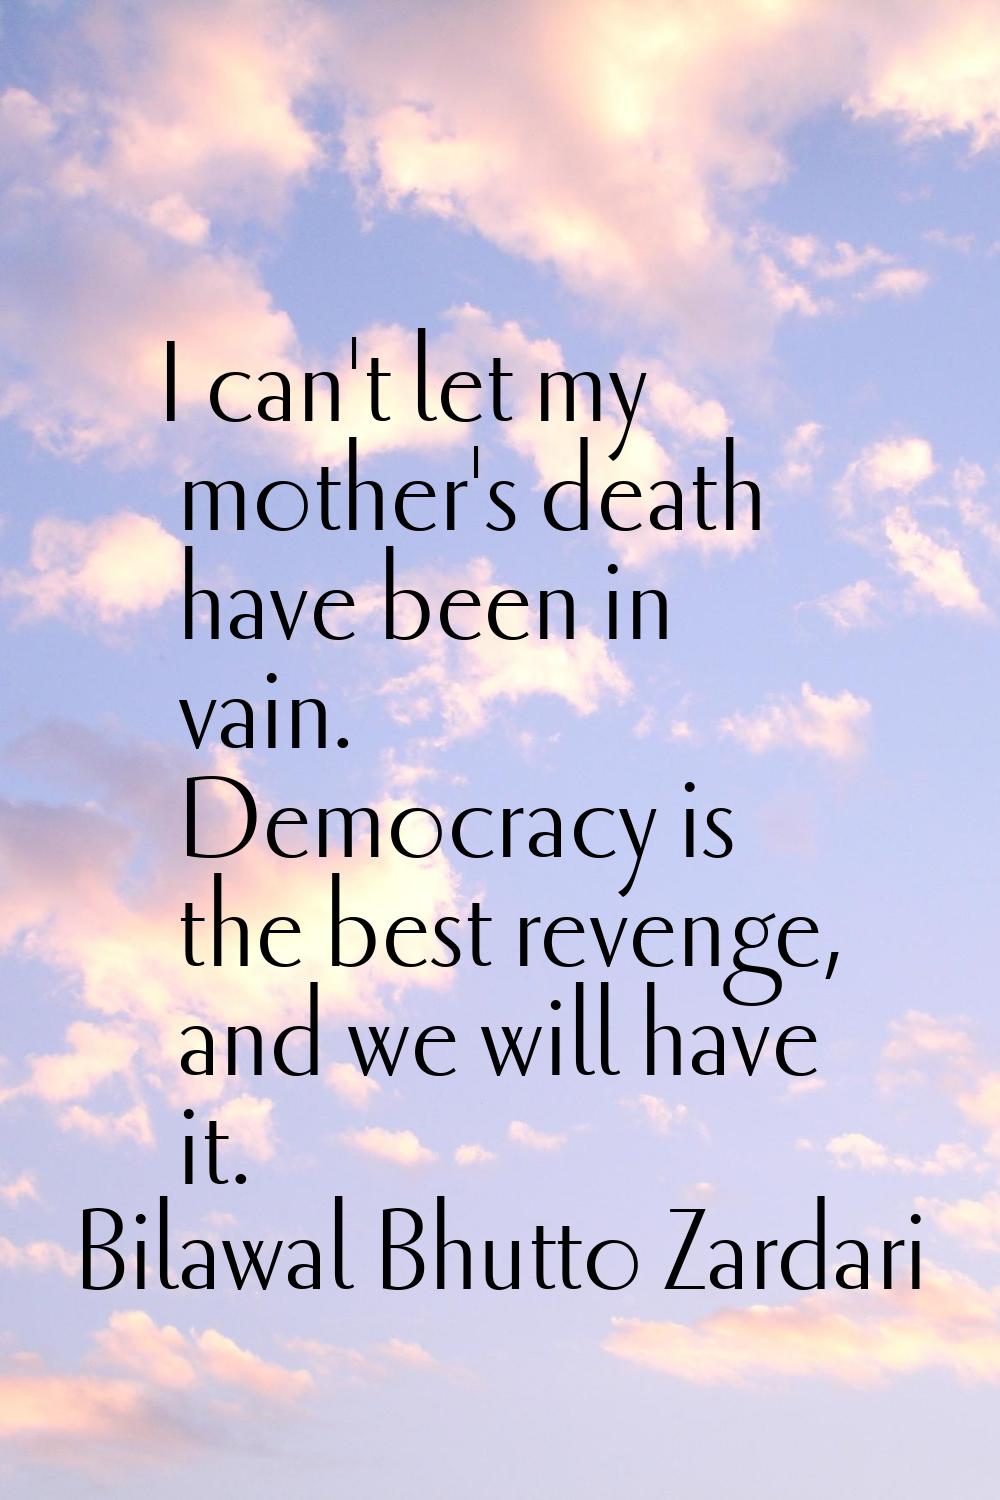 I can't let my mother's death have been in vain. Democracy is the best revenge, and we will have it